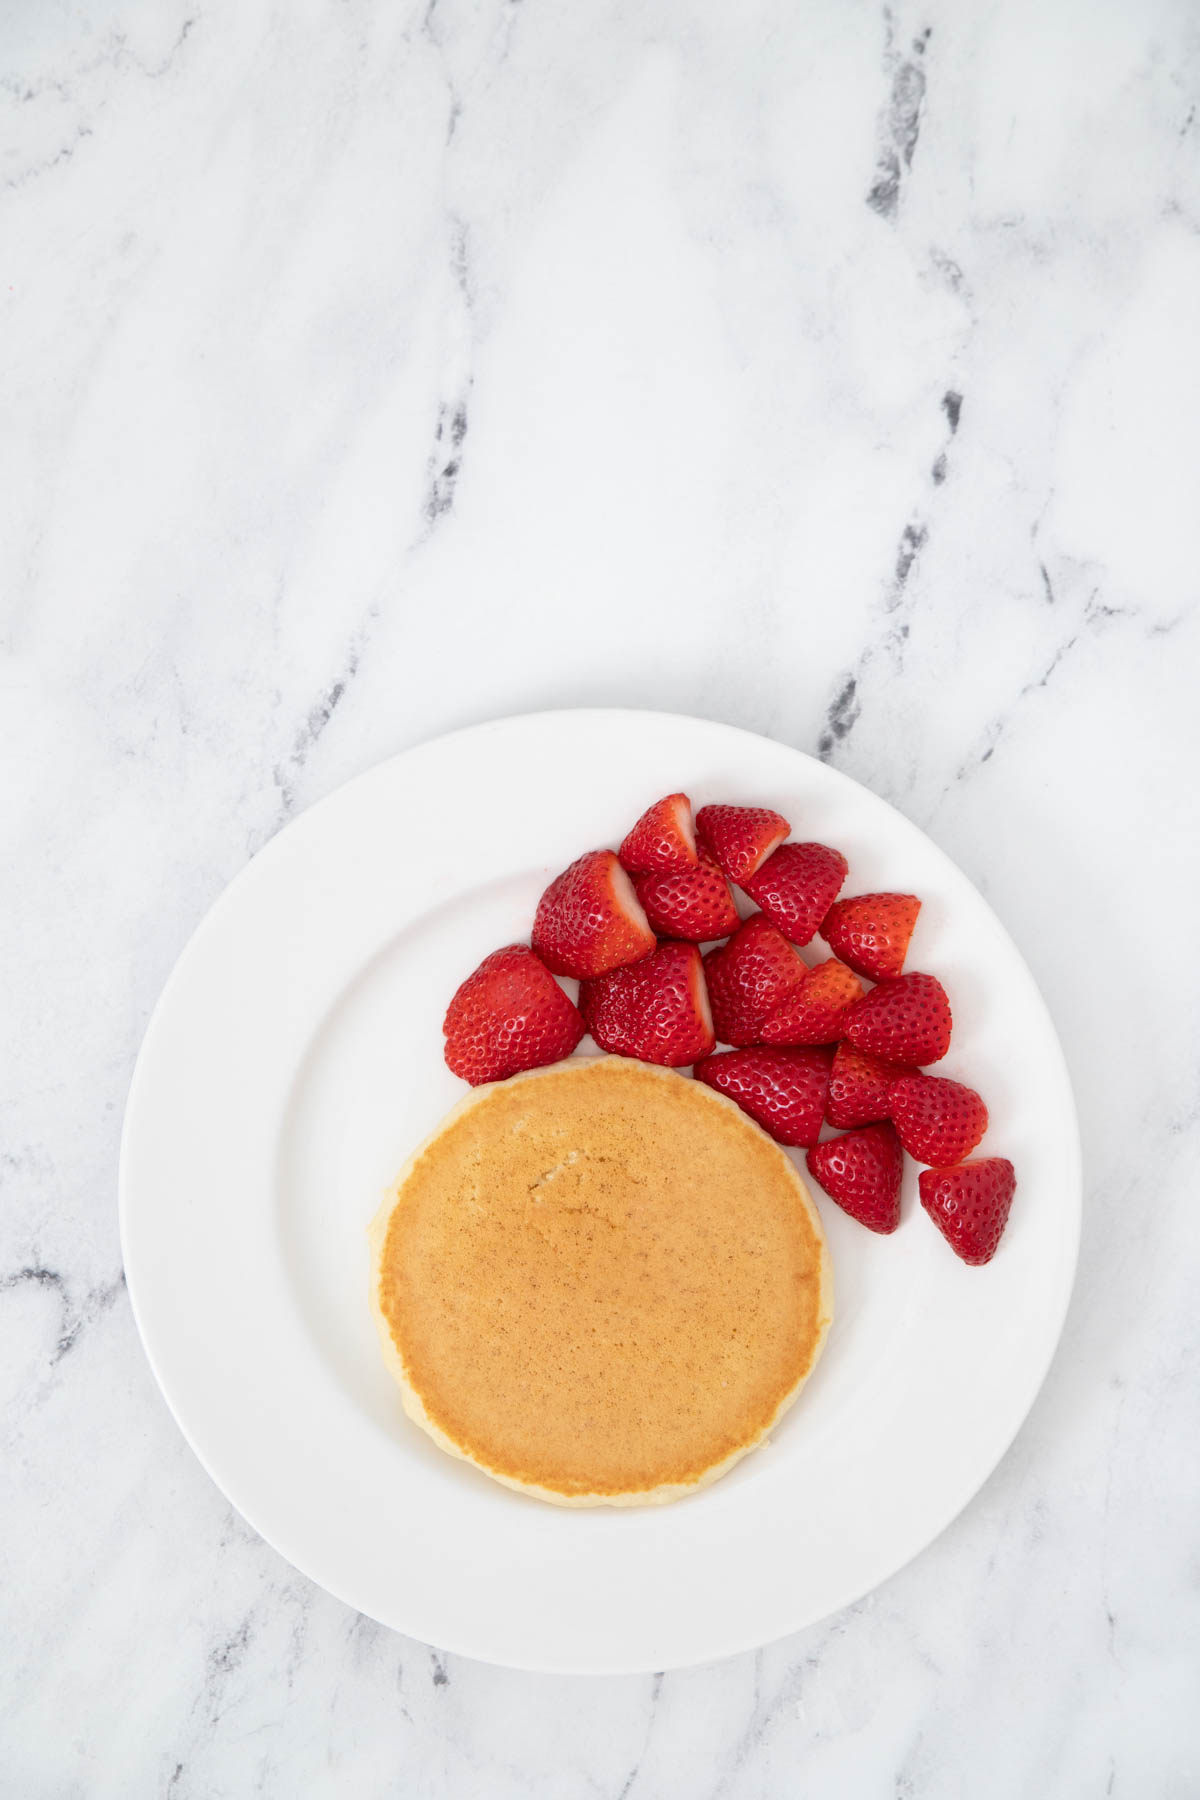 Pancakes with strawberries on a white plate.